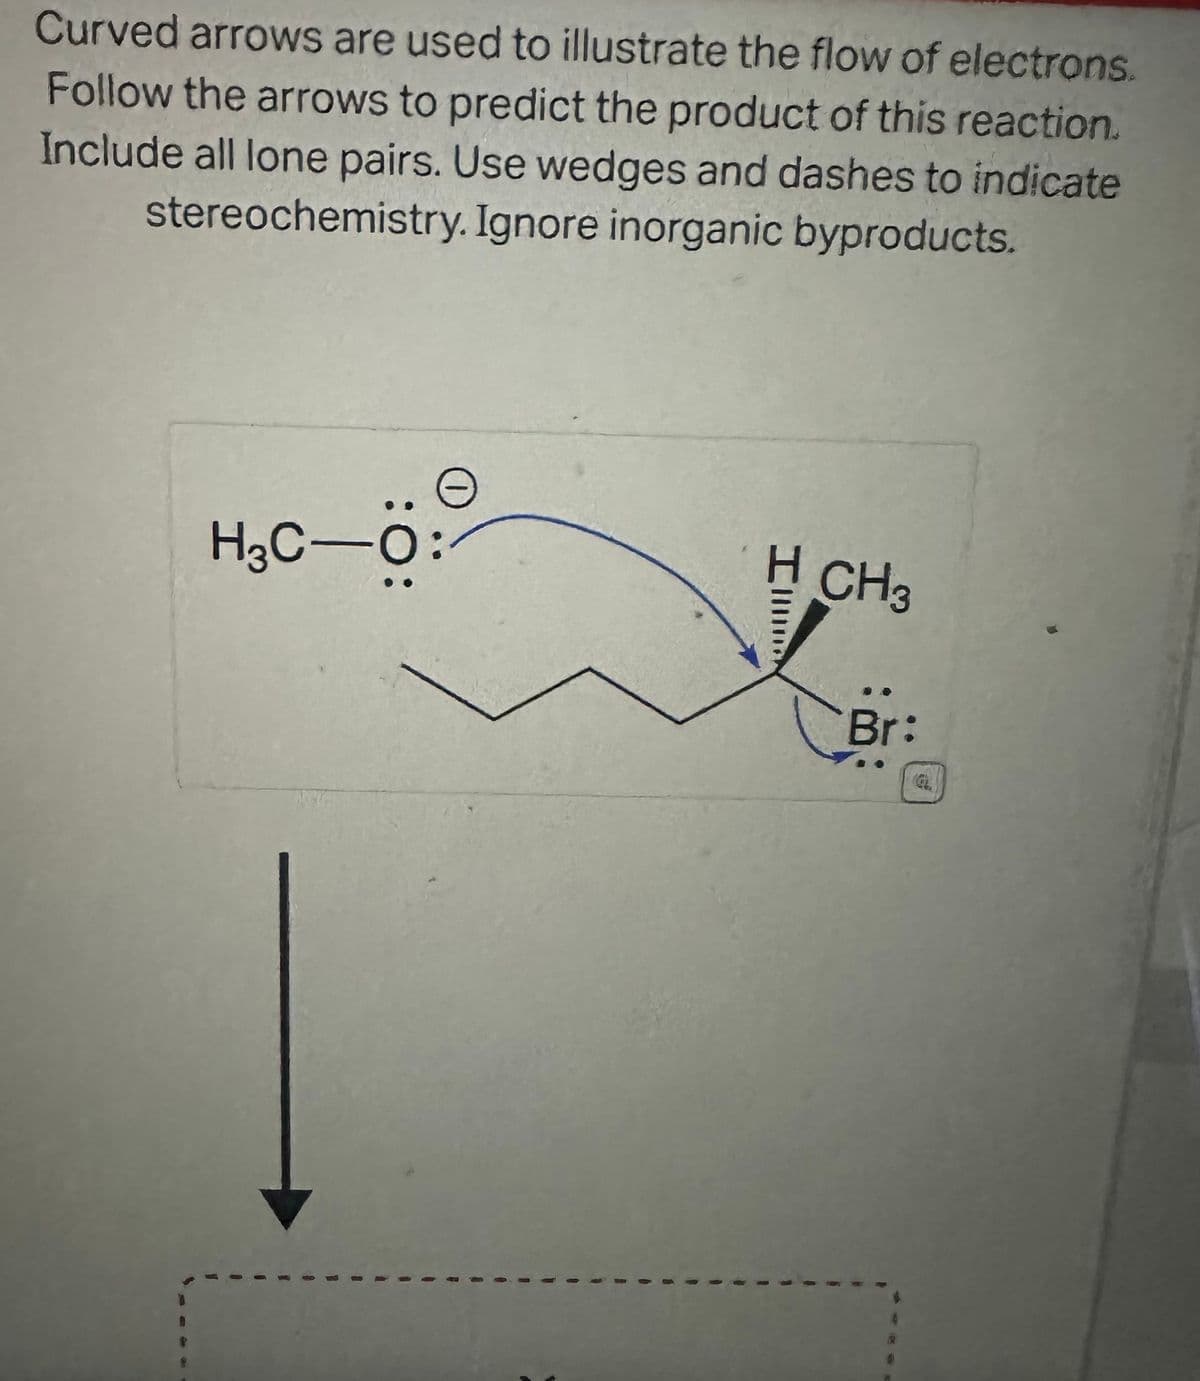 Curved arrows are used to illustrate the flow of electrons.
Follow the arrows to predict the product of this reaction.
Include all lone pairs. Use wedges and dashes to indicate
stereochemistry. Ignore inorganic byproducts.
0
H₂C-O:
H CH3
Br: